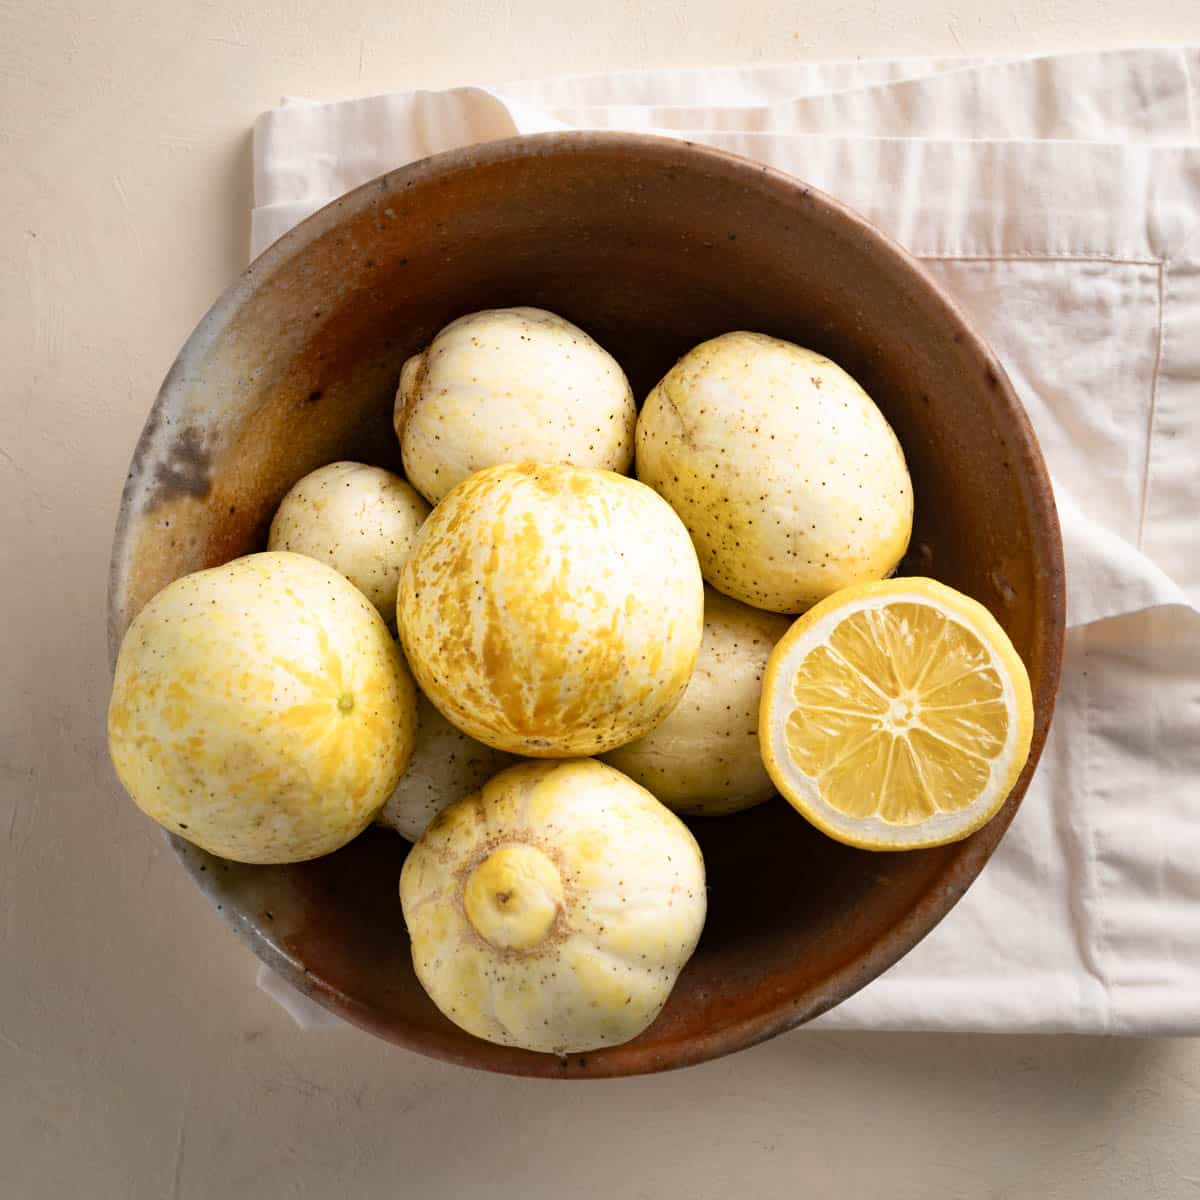 Top down view of lemon cucumbers in a brown bowl atop an off white linen napkin. Half a lemon is sitting cut side up in the bowl.